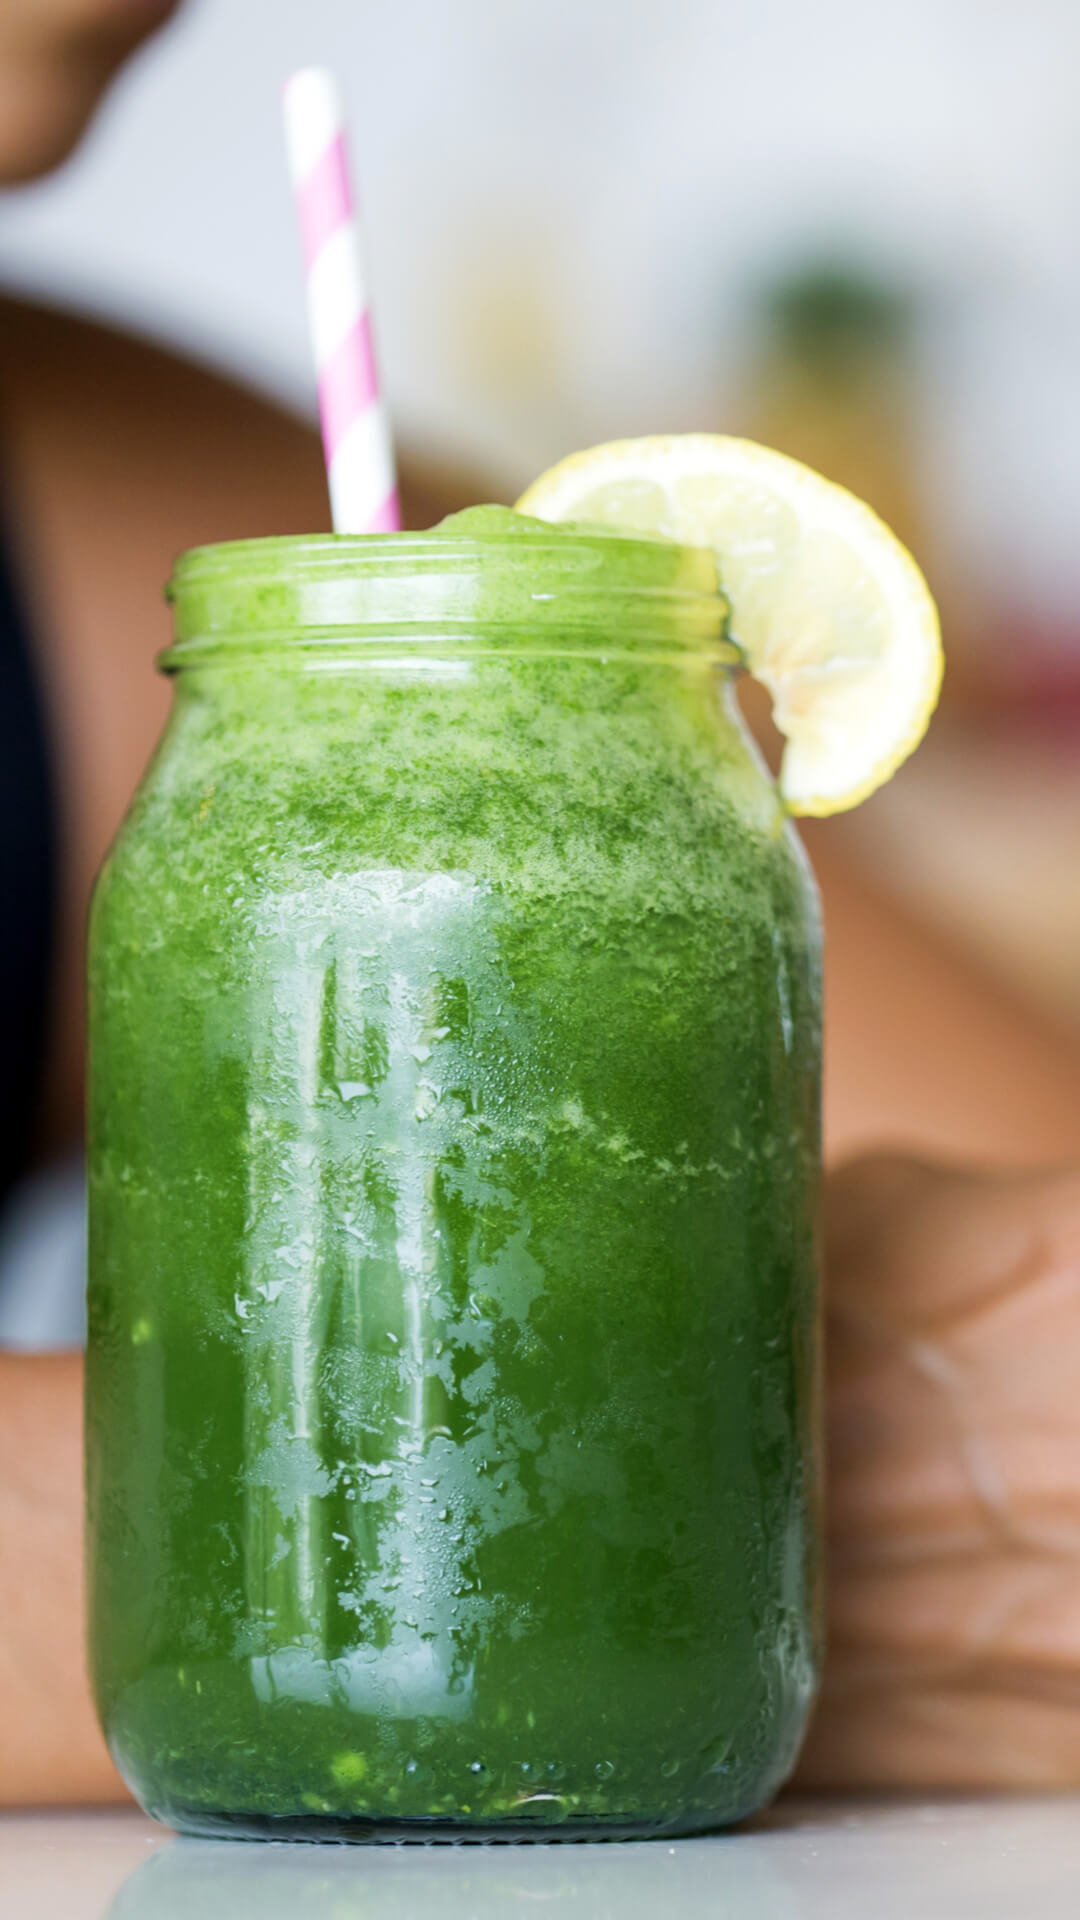 green smoothie for constipation